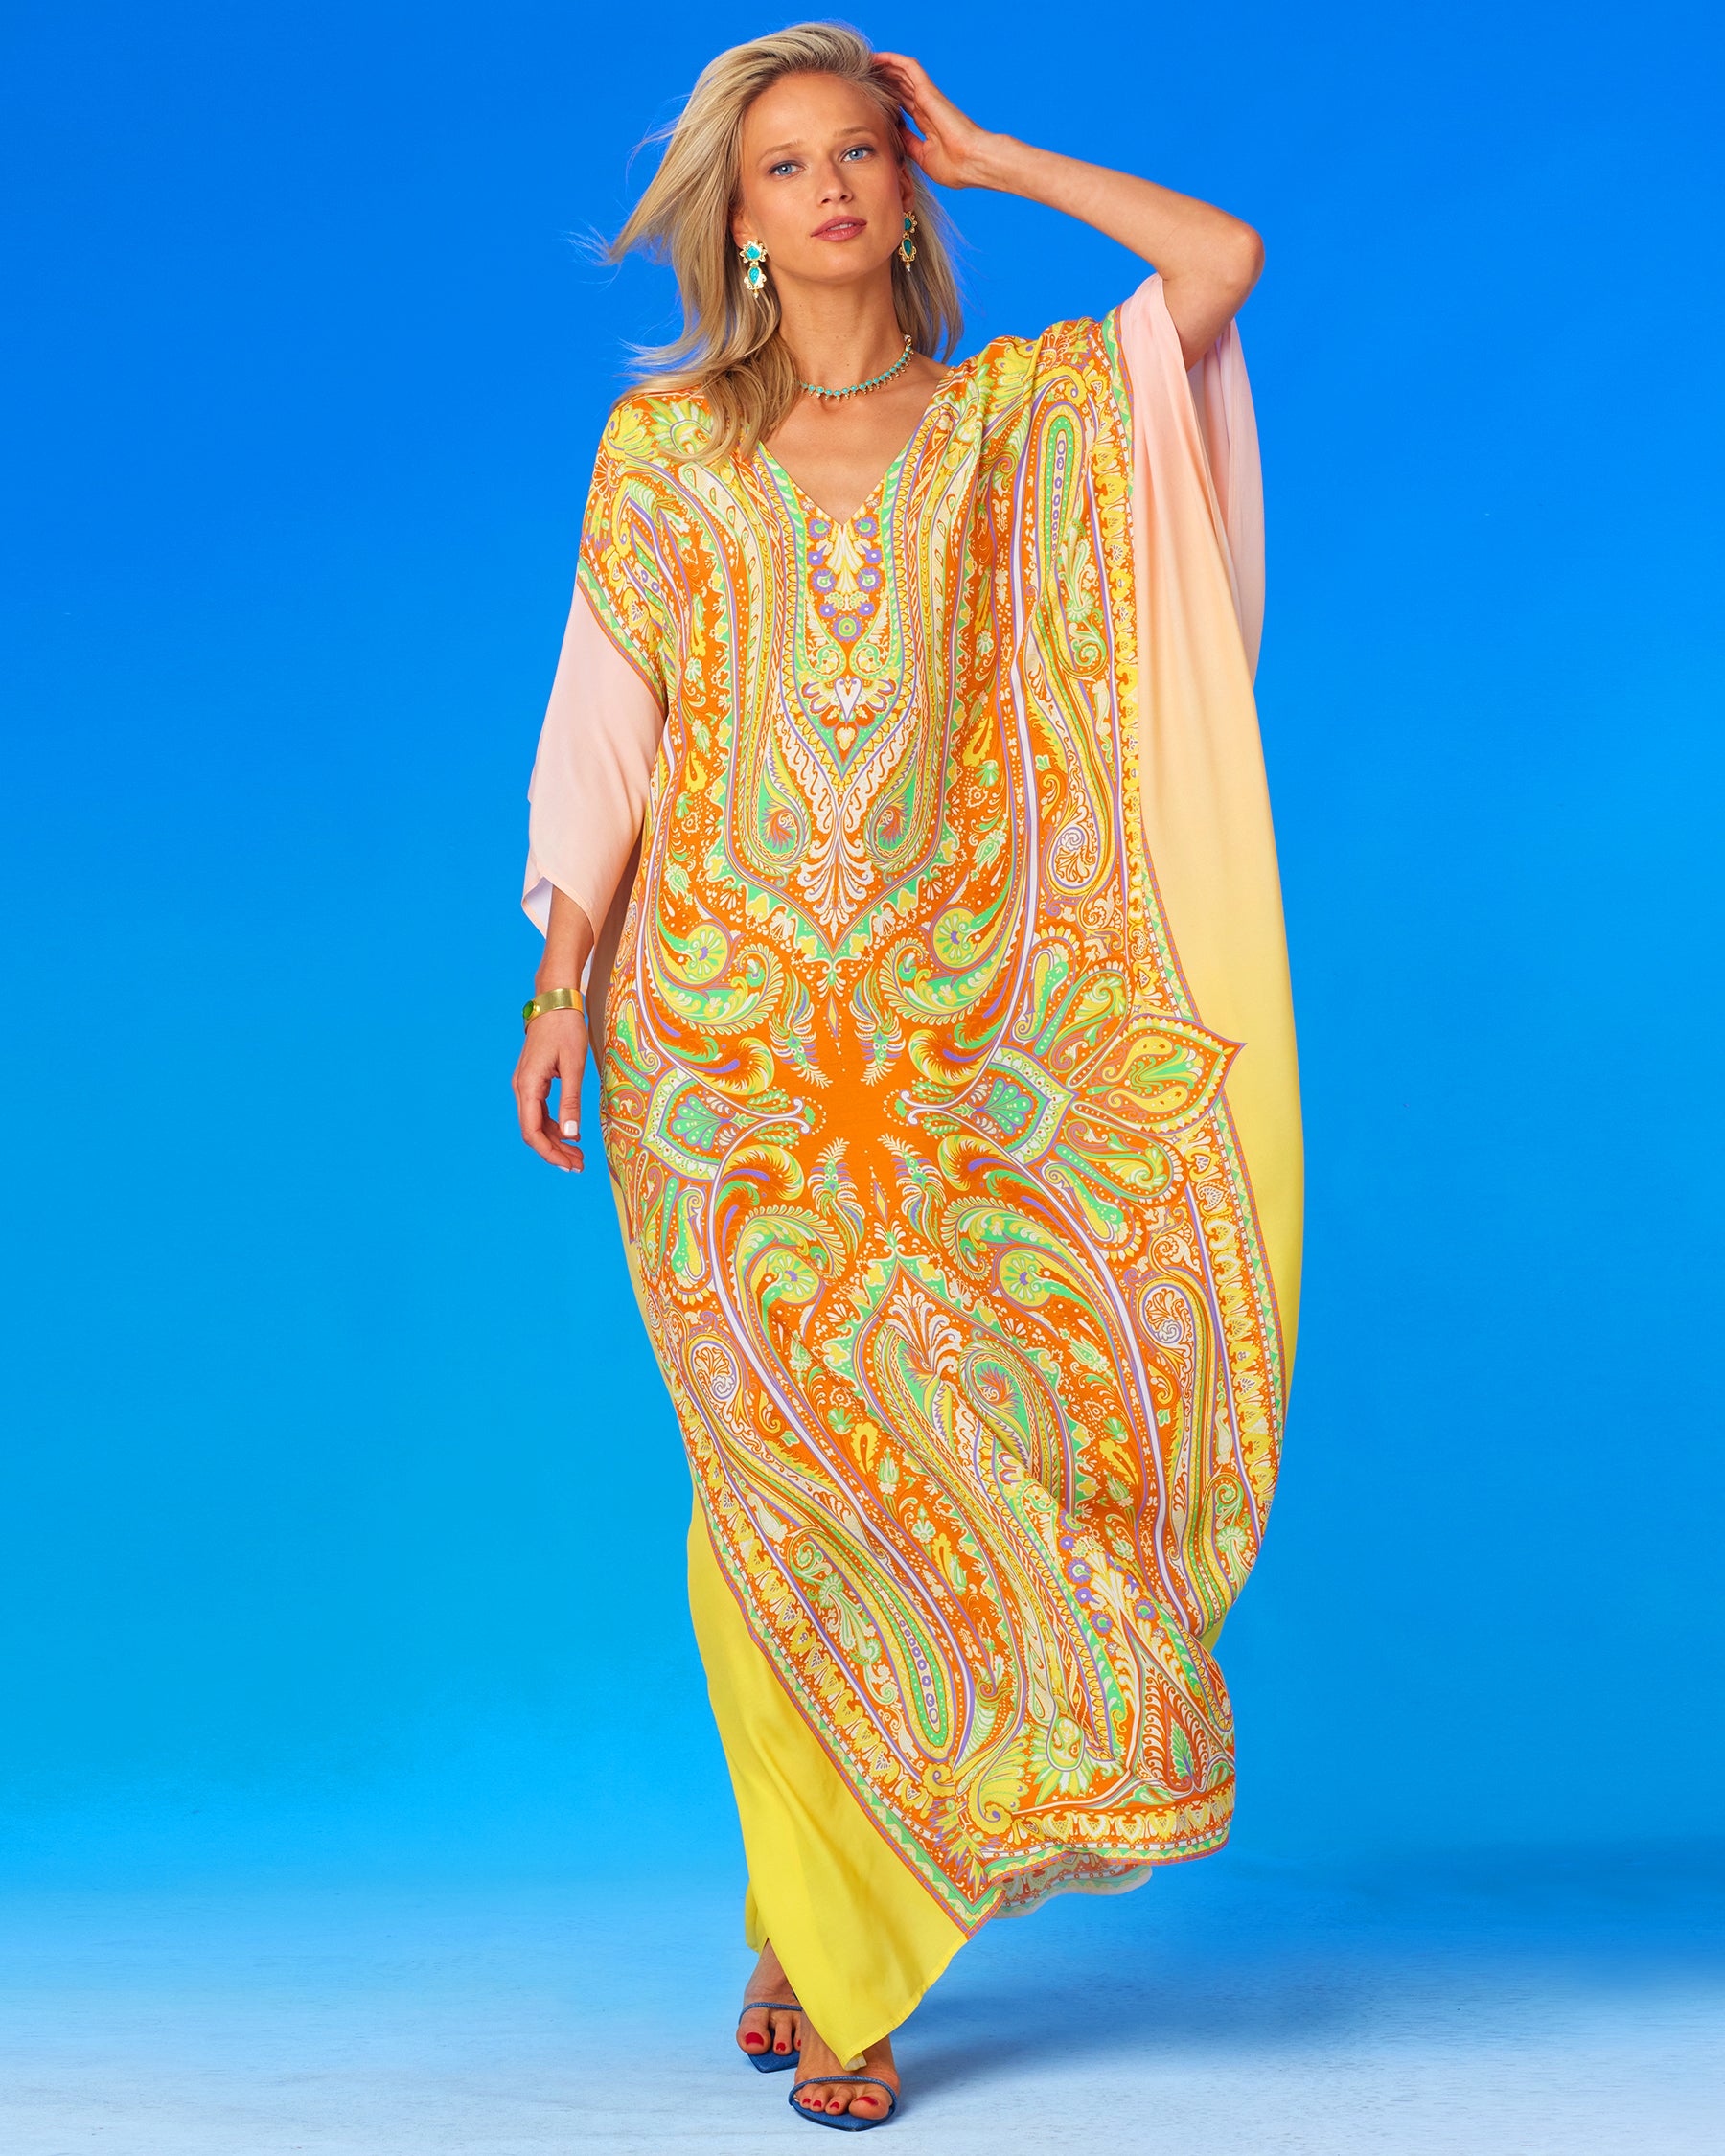 Gaia Kaftan in Sun-Kissed Paisley-Front Full View with Arm Raised